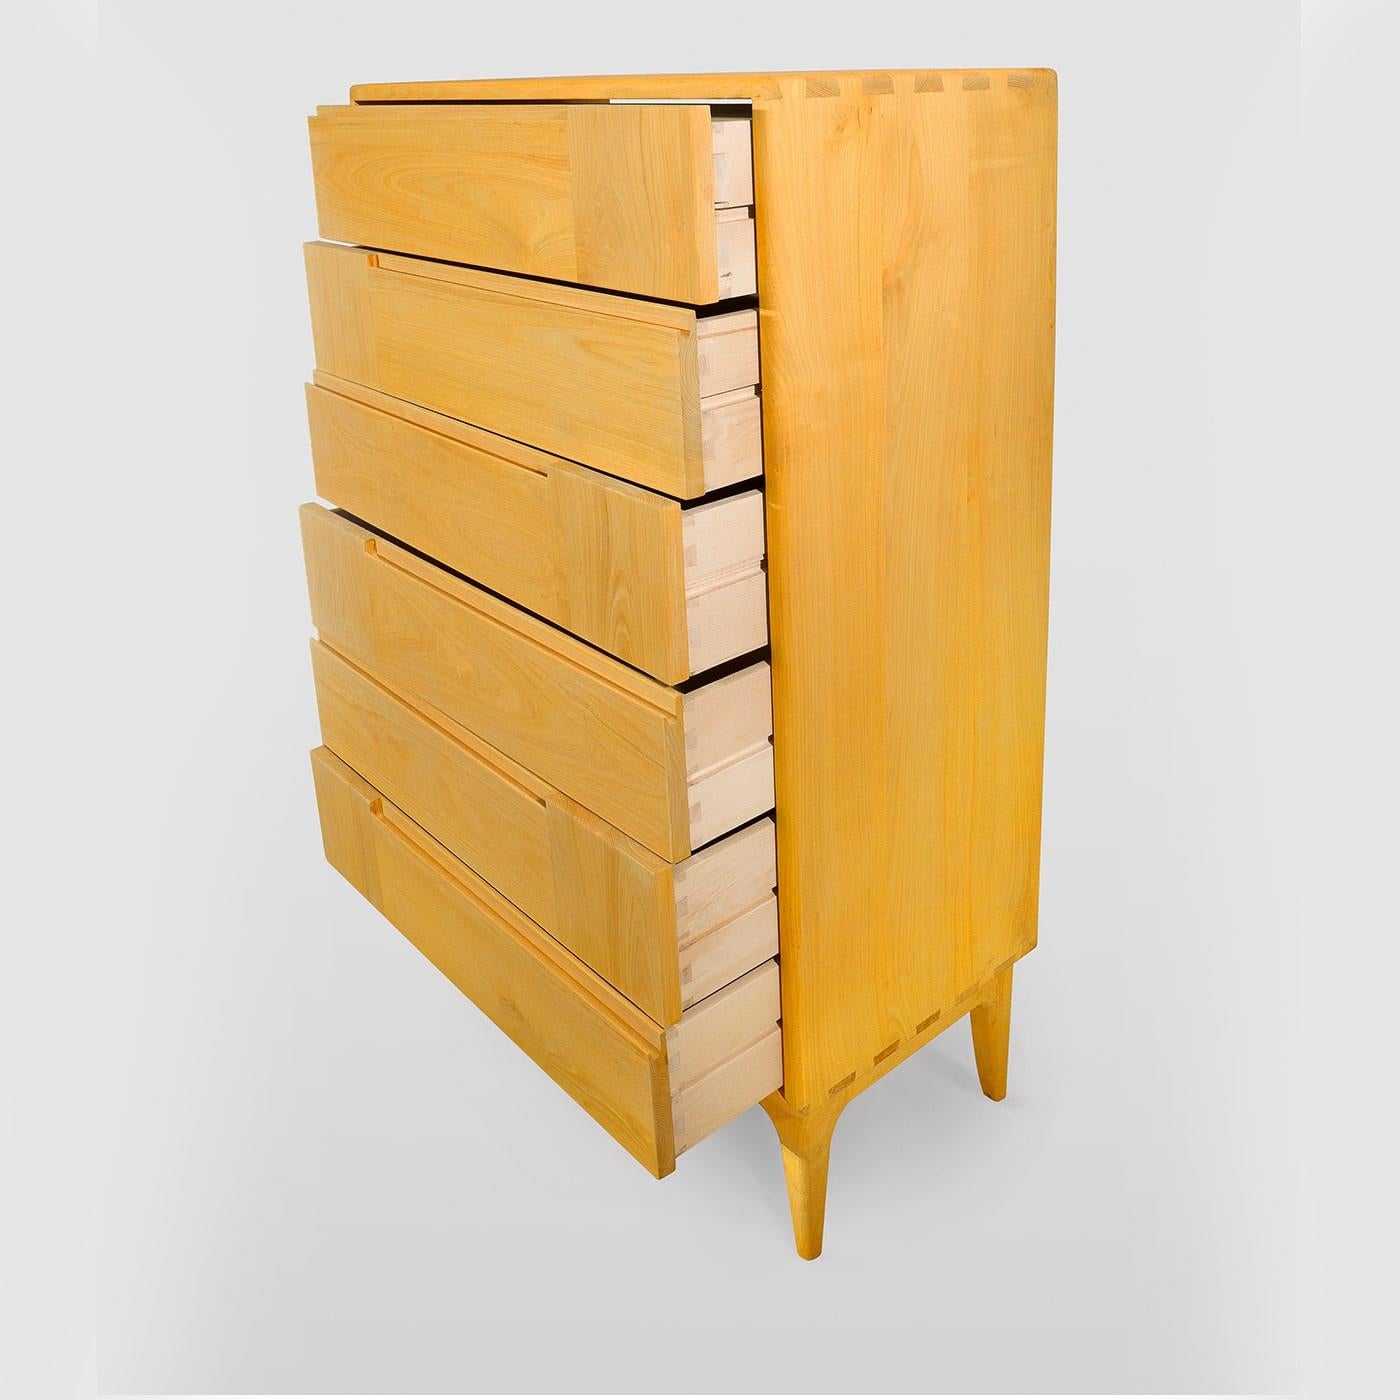 Lively and sophisticated, this Scandinavian-style dresser will make a singular addition to a contemporary interior. Handcrafted of solid chestnut, it features six drawers boasting horizontal and vertical lines, creating a practical groove that